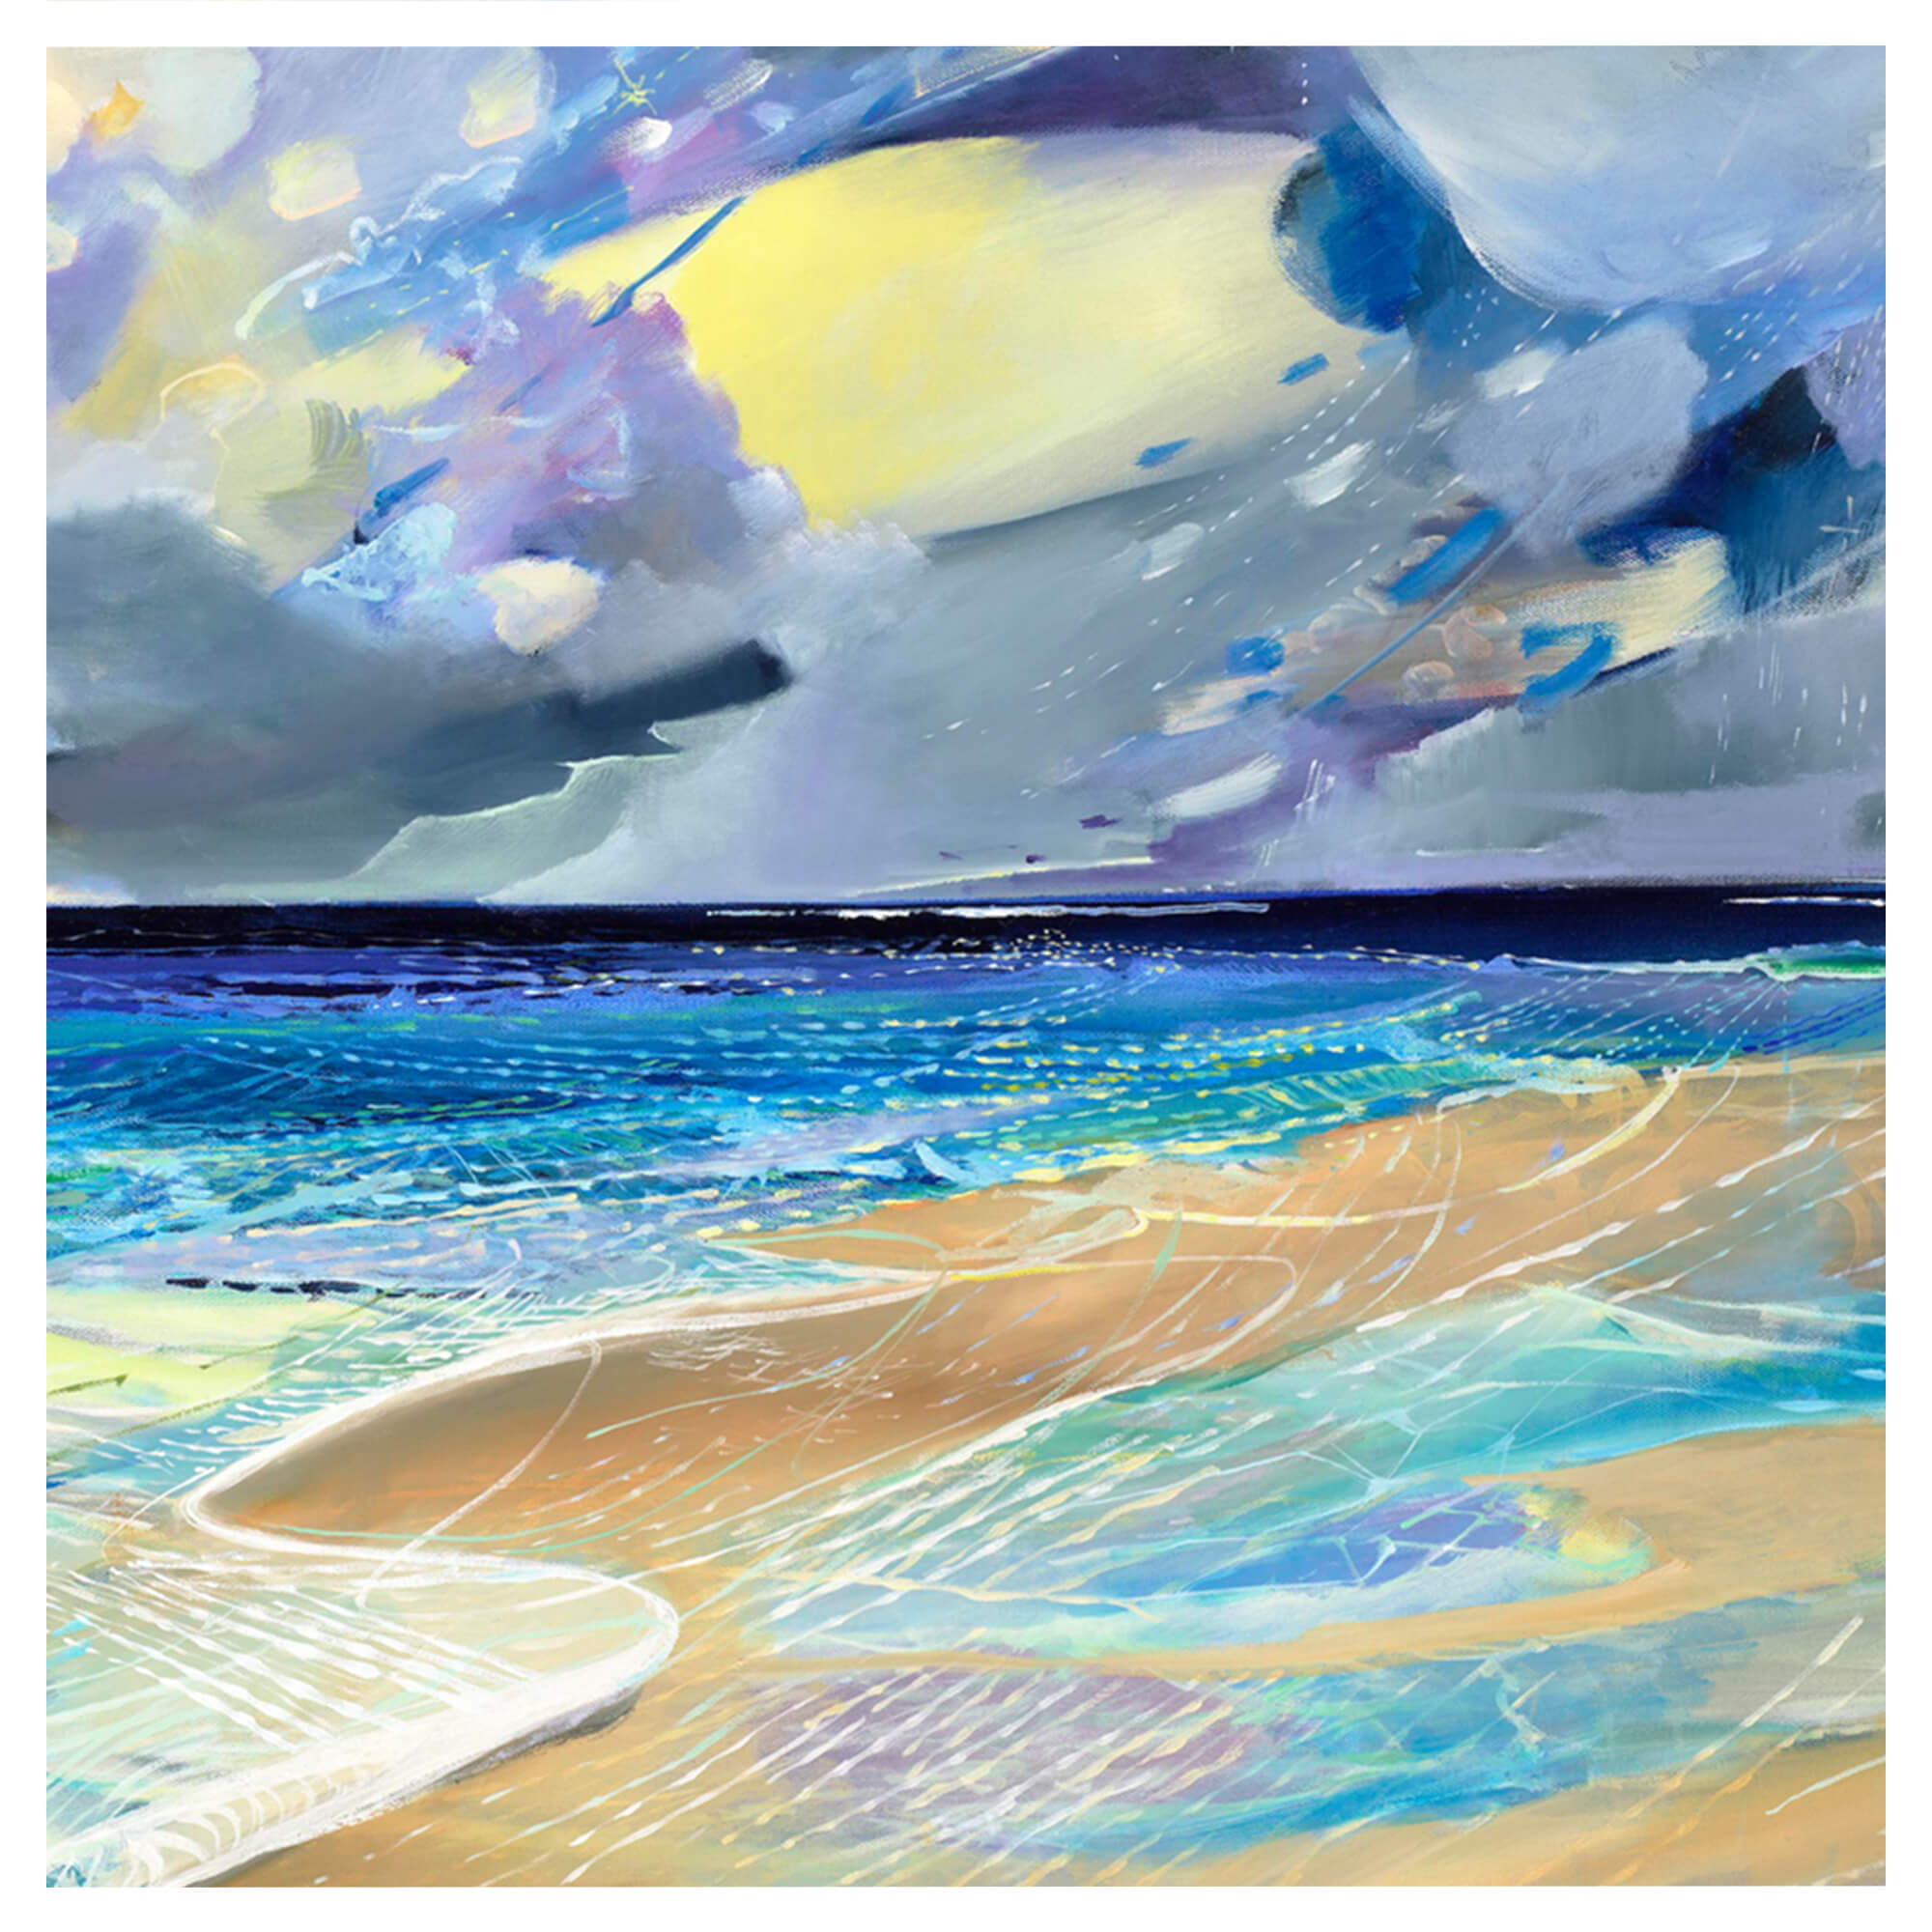 Abstract seascape with different shades of blue by Hawaii artist Saumolia Puapuaga